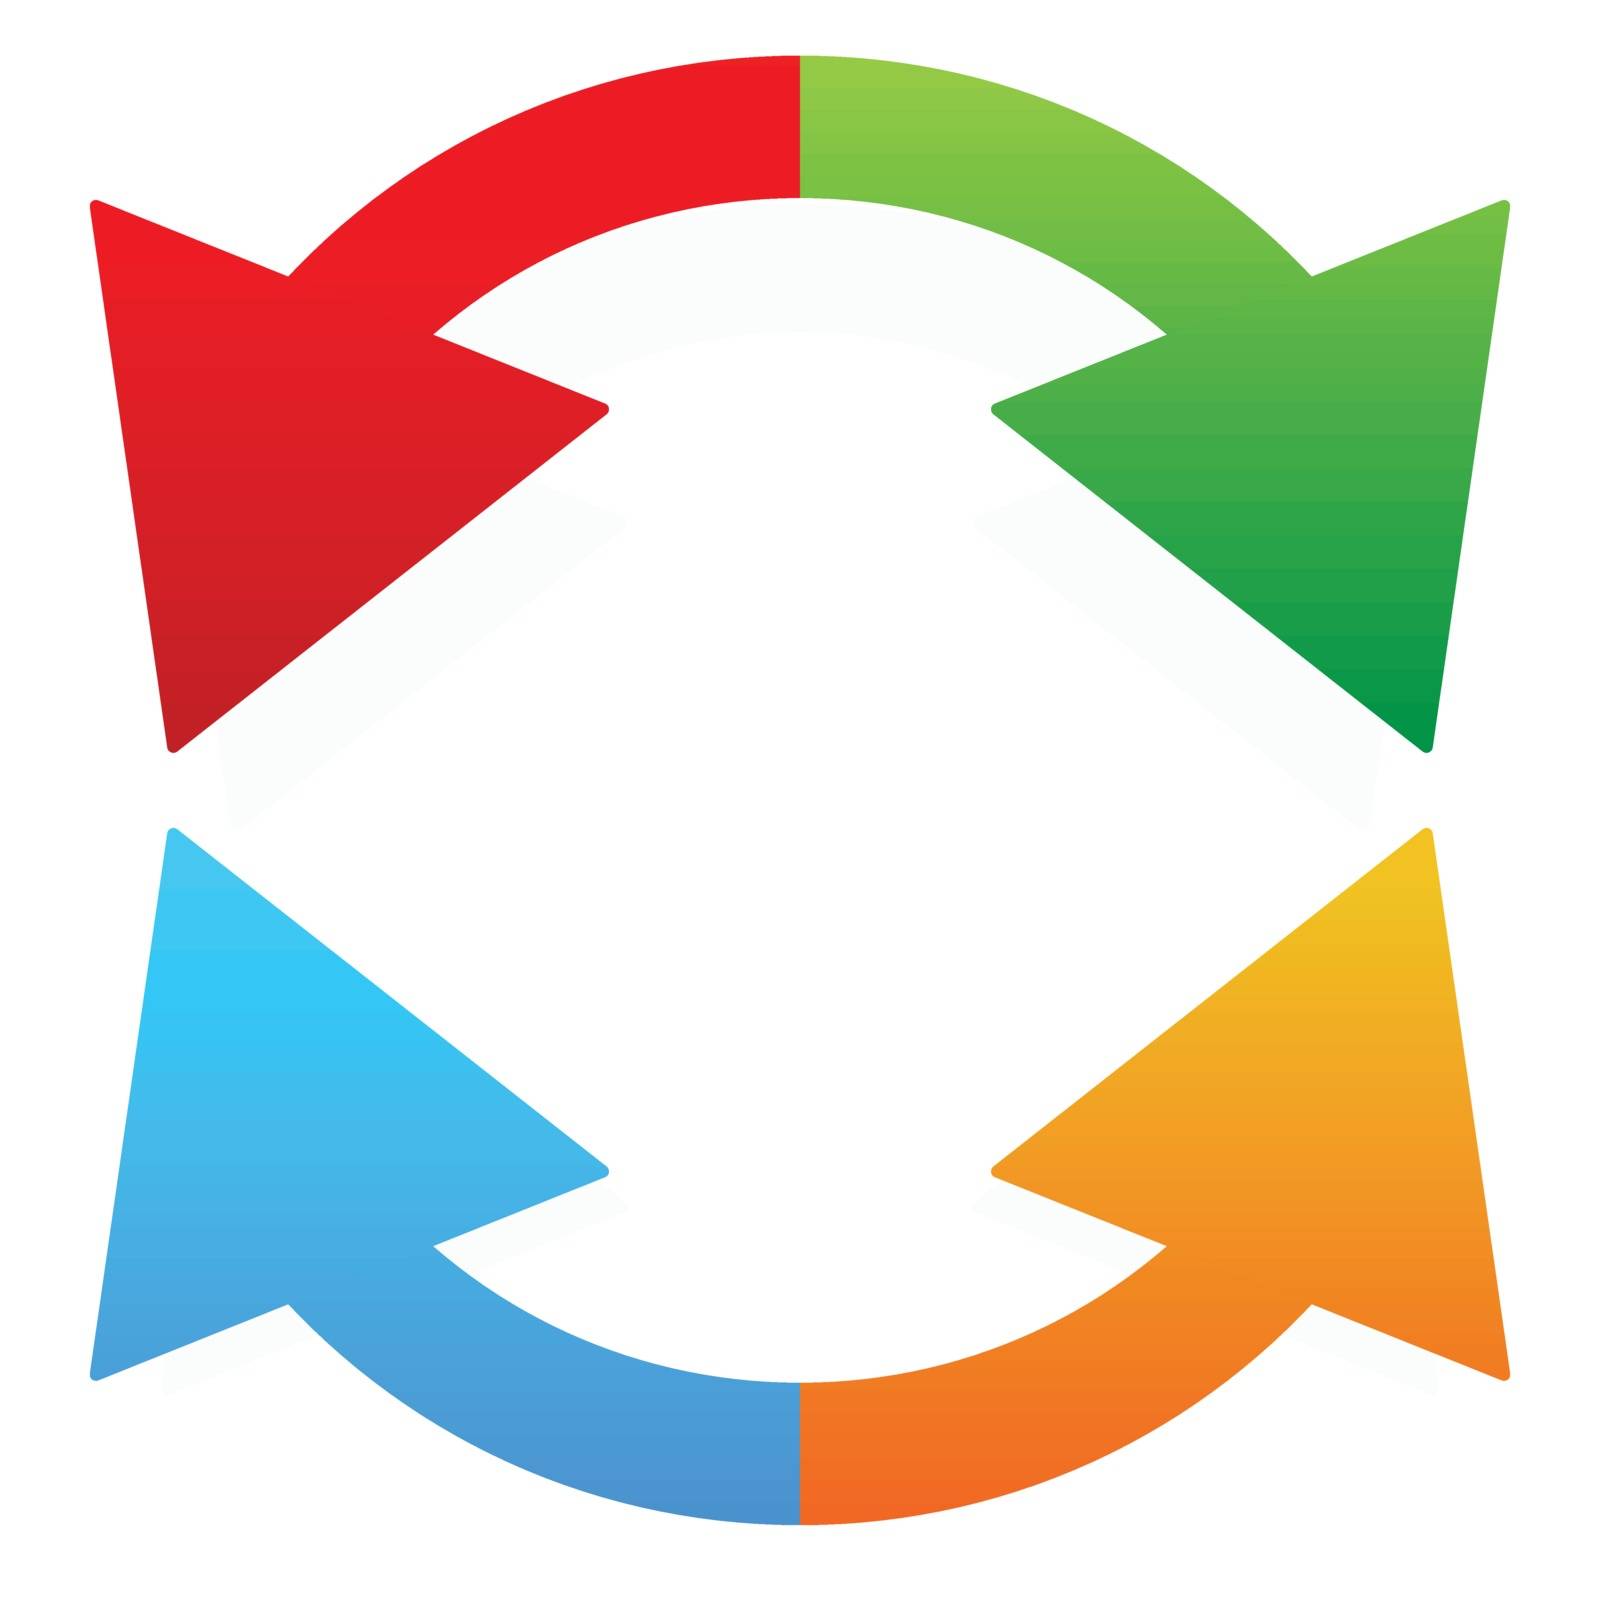 Circular, rotating arrows around on white. Colorful graphics. by 3dvector